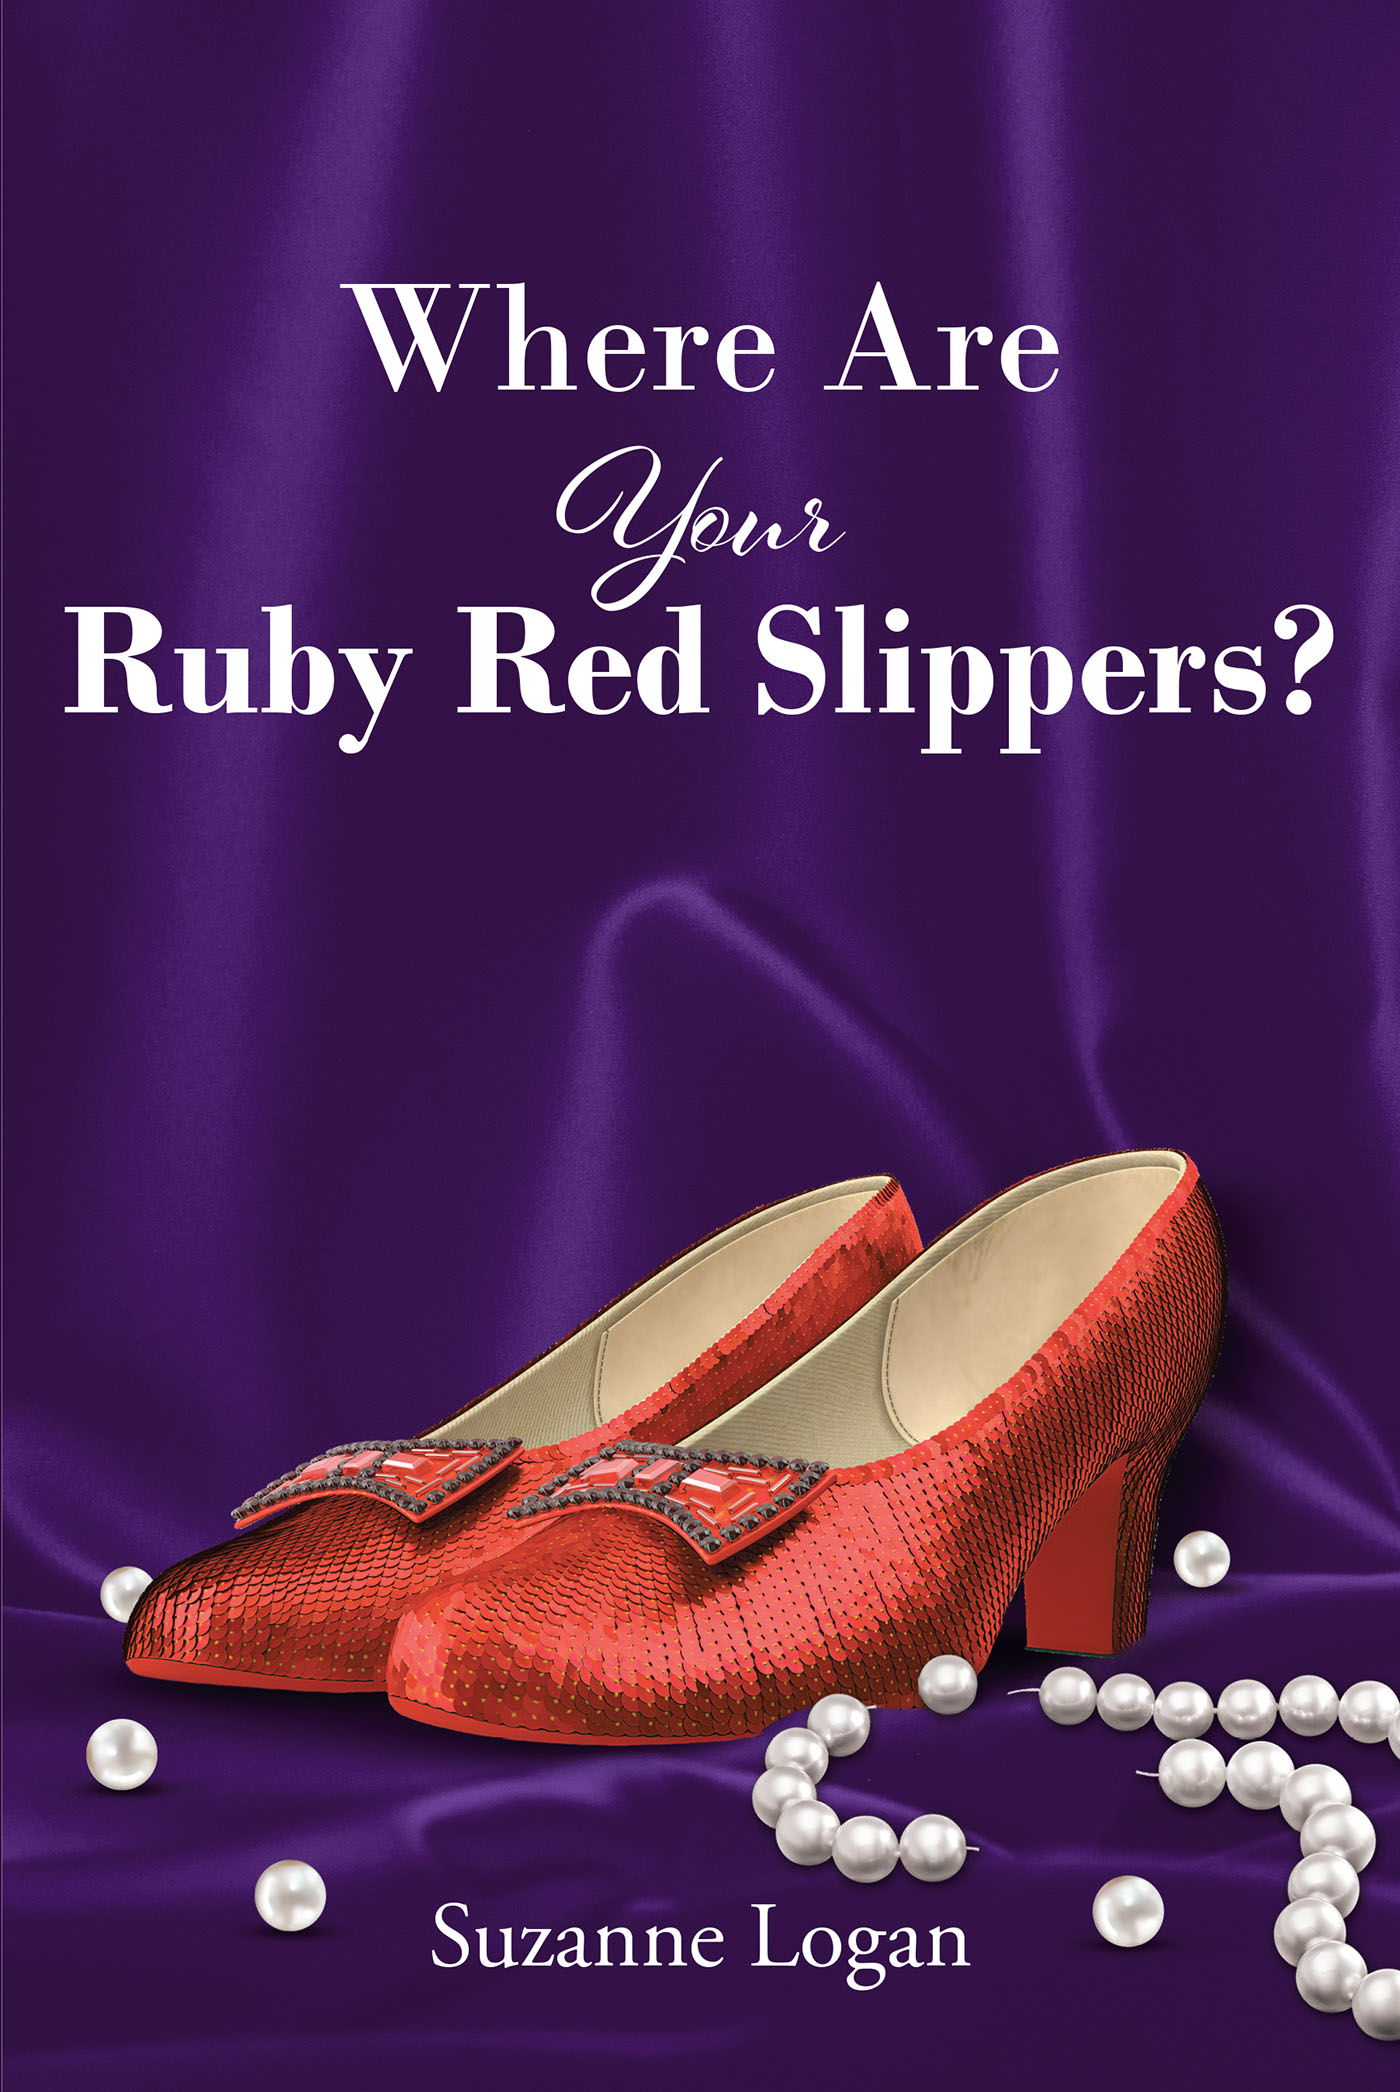 Suzanne Logan’s Newly Released "Where Are Your Ruby Red Slippers?" is an Encouraging Message of Hope to Anyone Who Has Faced Abuse